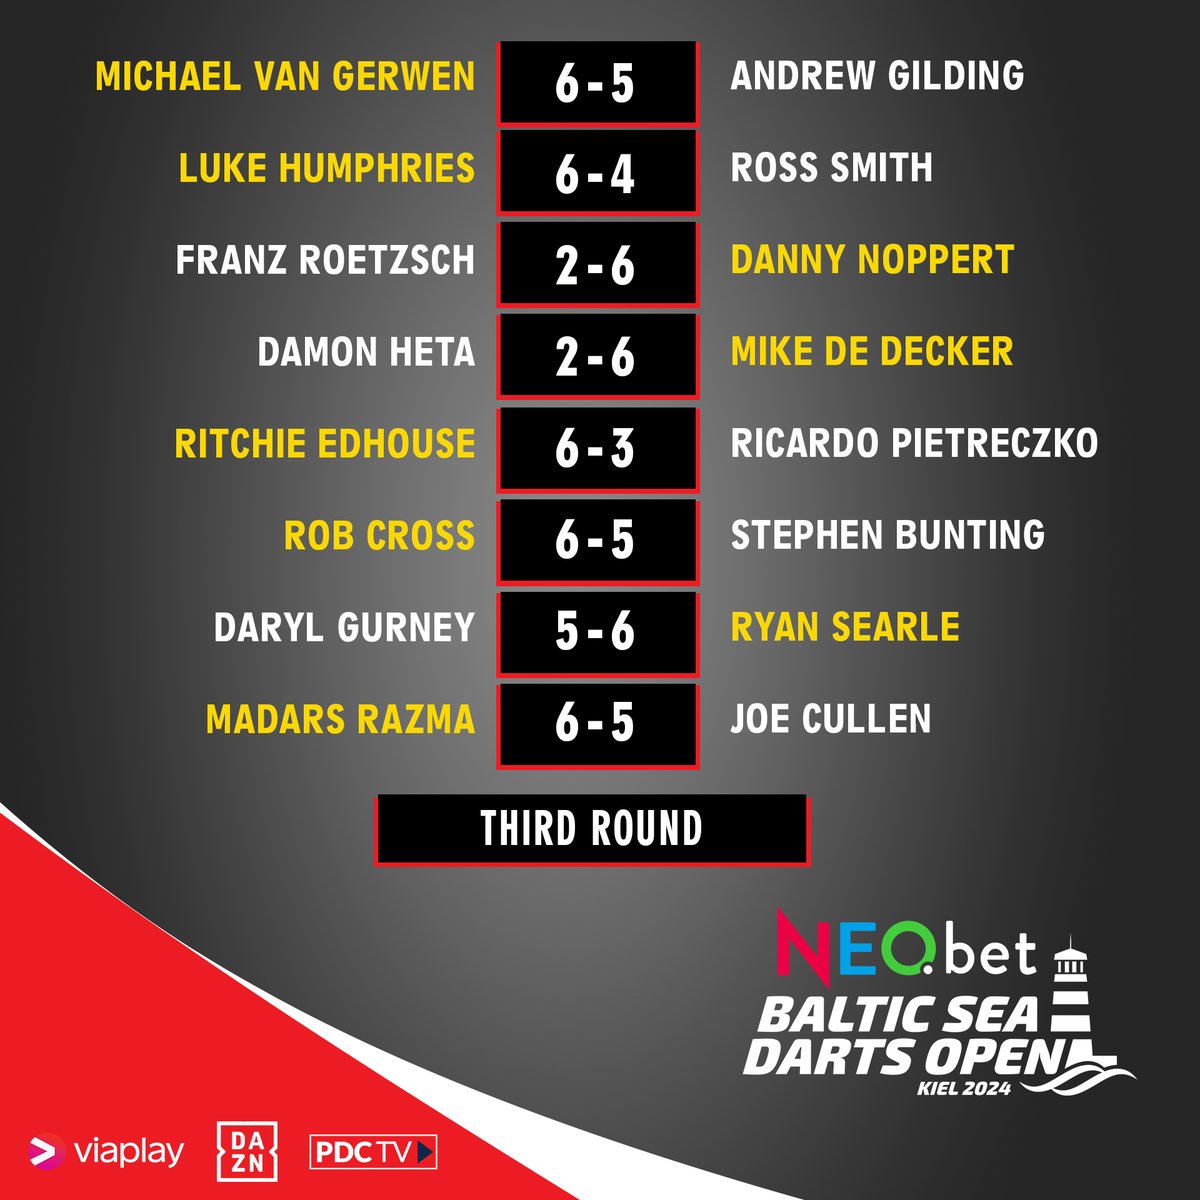 Recap of the results from the Third Round action in Kiel... Join us again at 1800 GMT for the final session of the Neo.bet Baltic Sea Darts Open on PDCTV. 📺 bit.ly/PDCTVLive